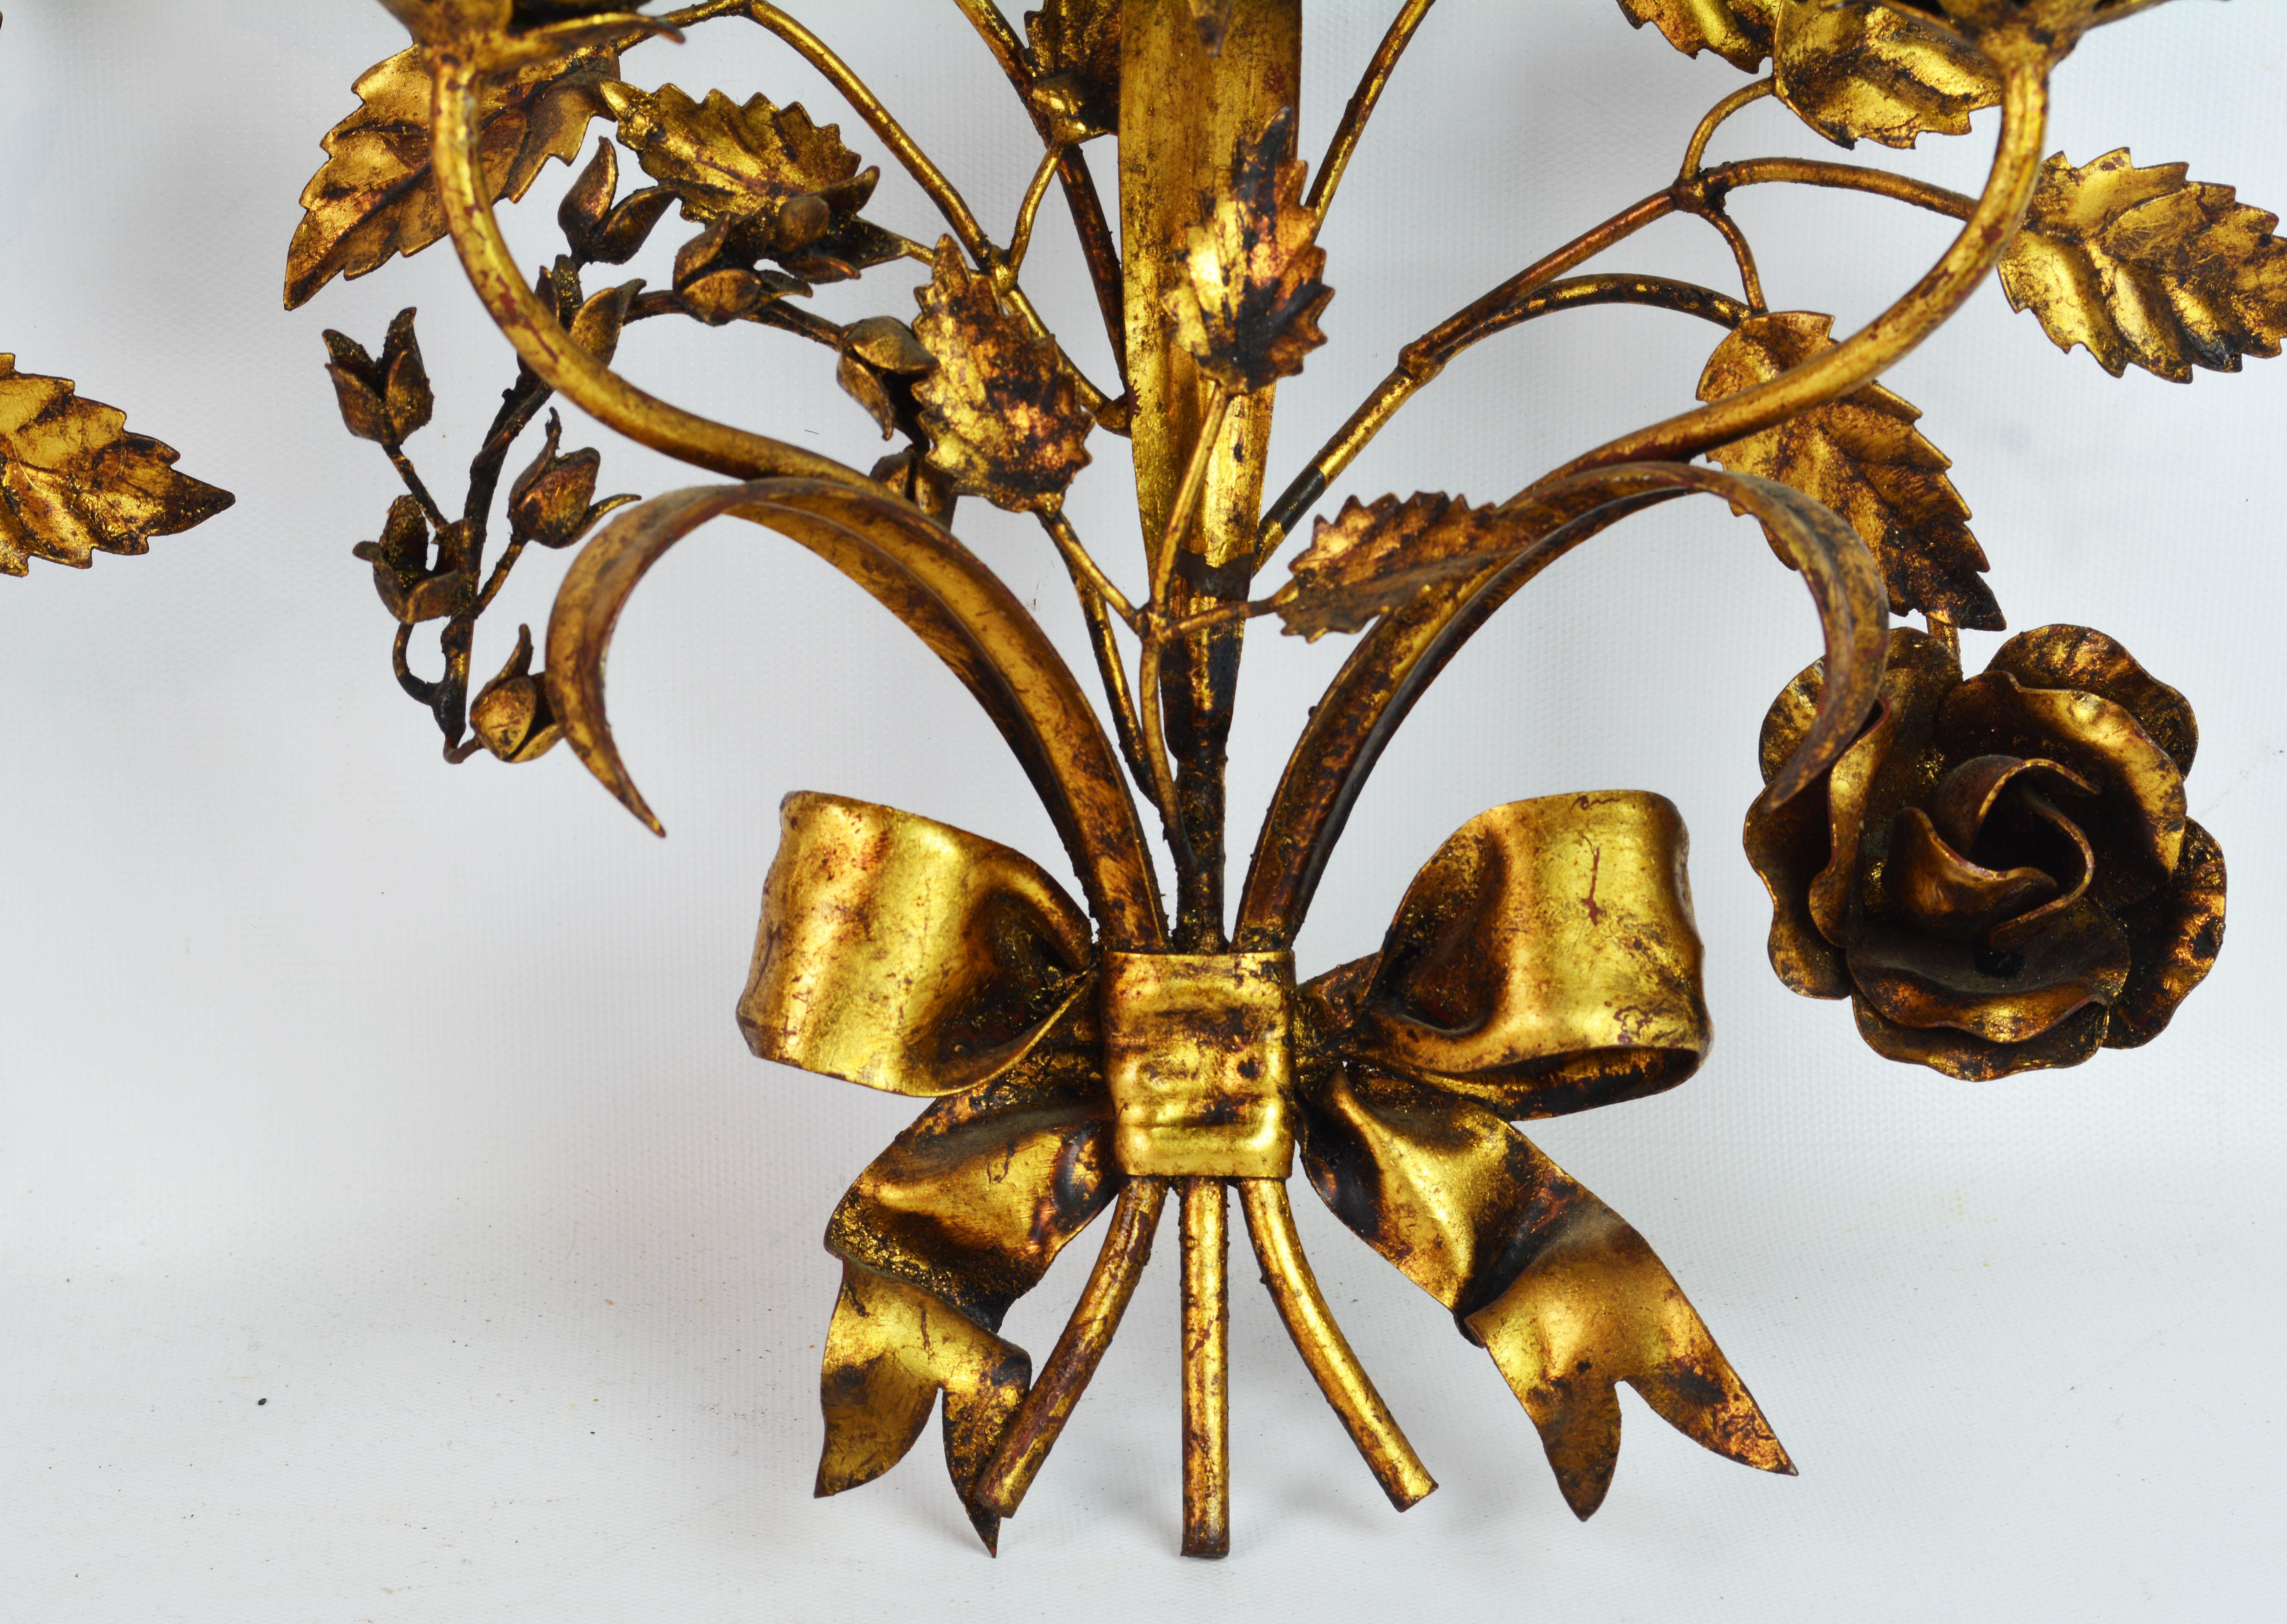 20th Century Pair of Two-Arm Midcentury Italian Gilt Tole Flower Sconces with Ribbons